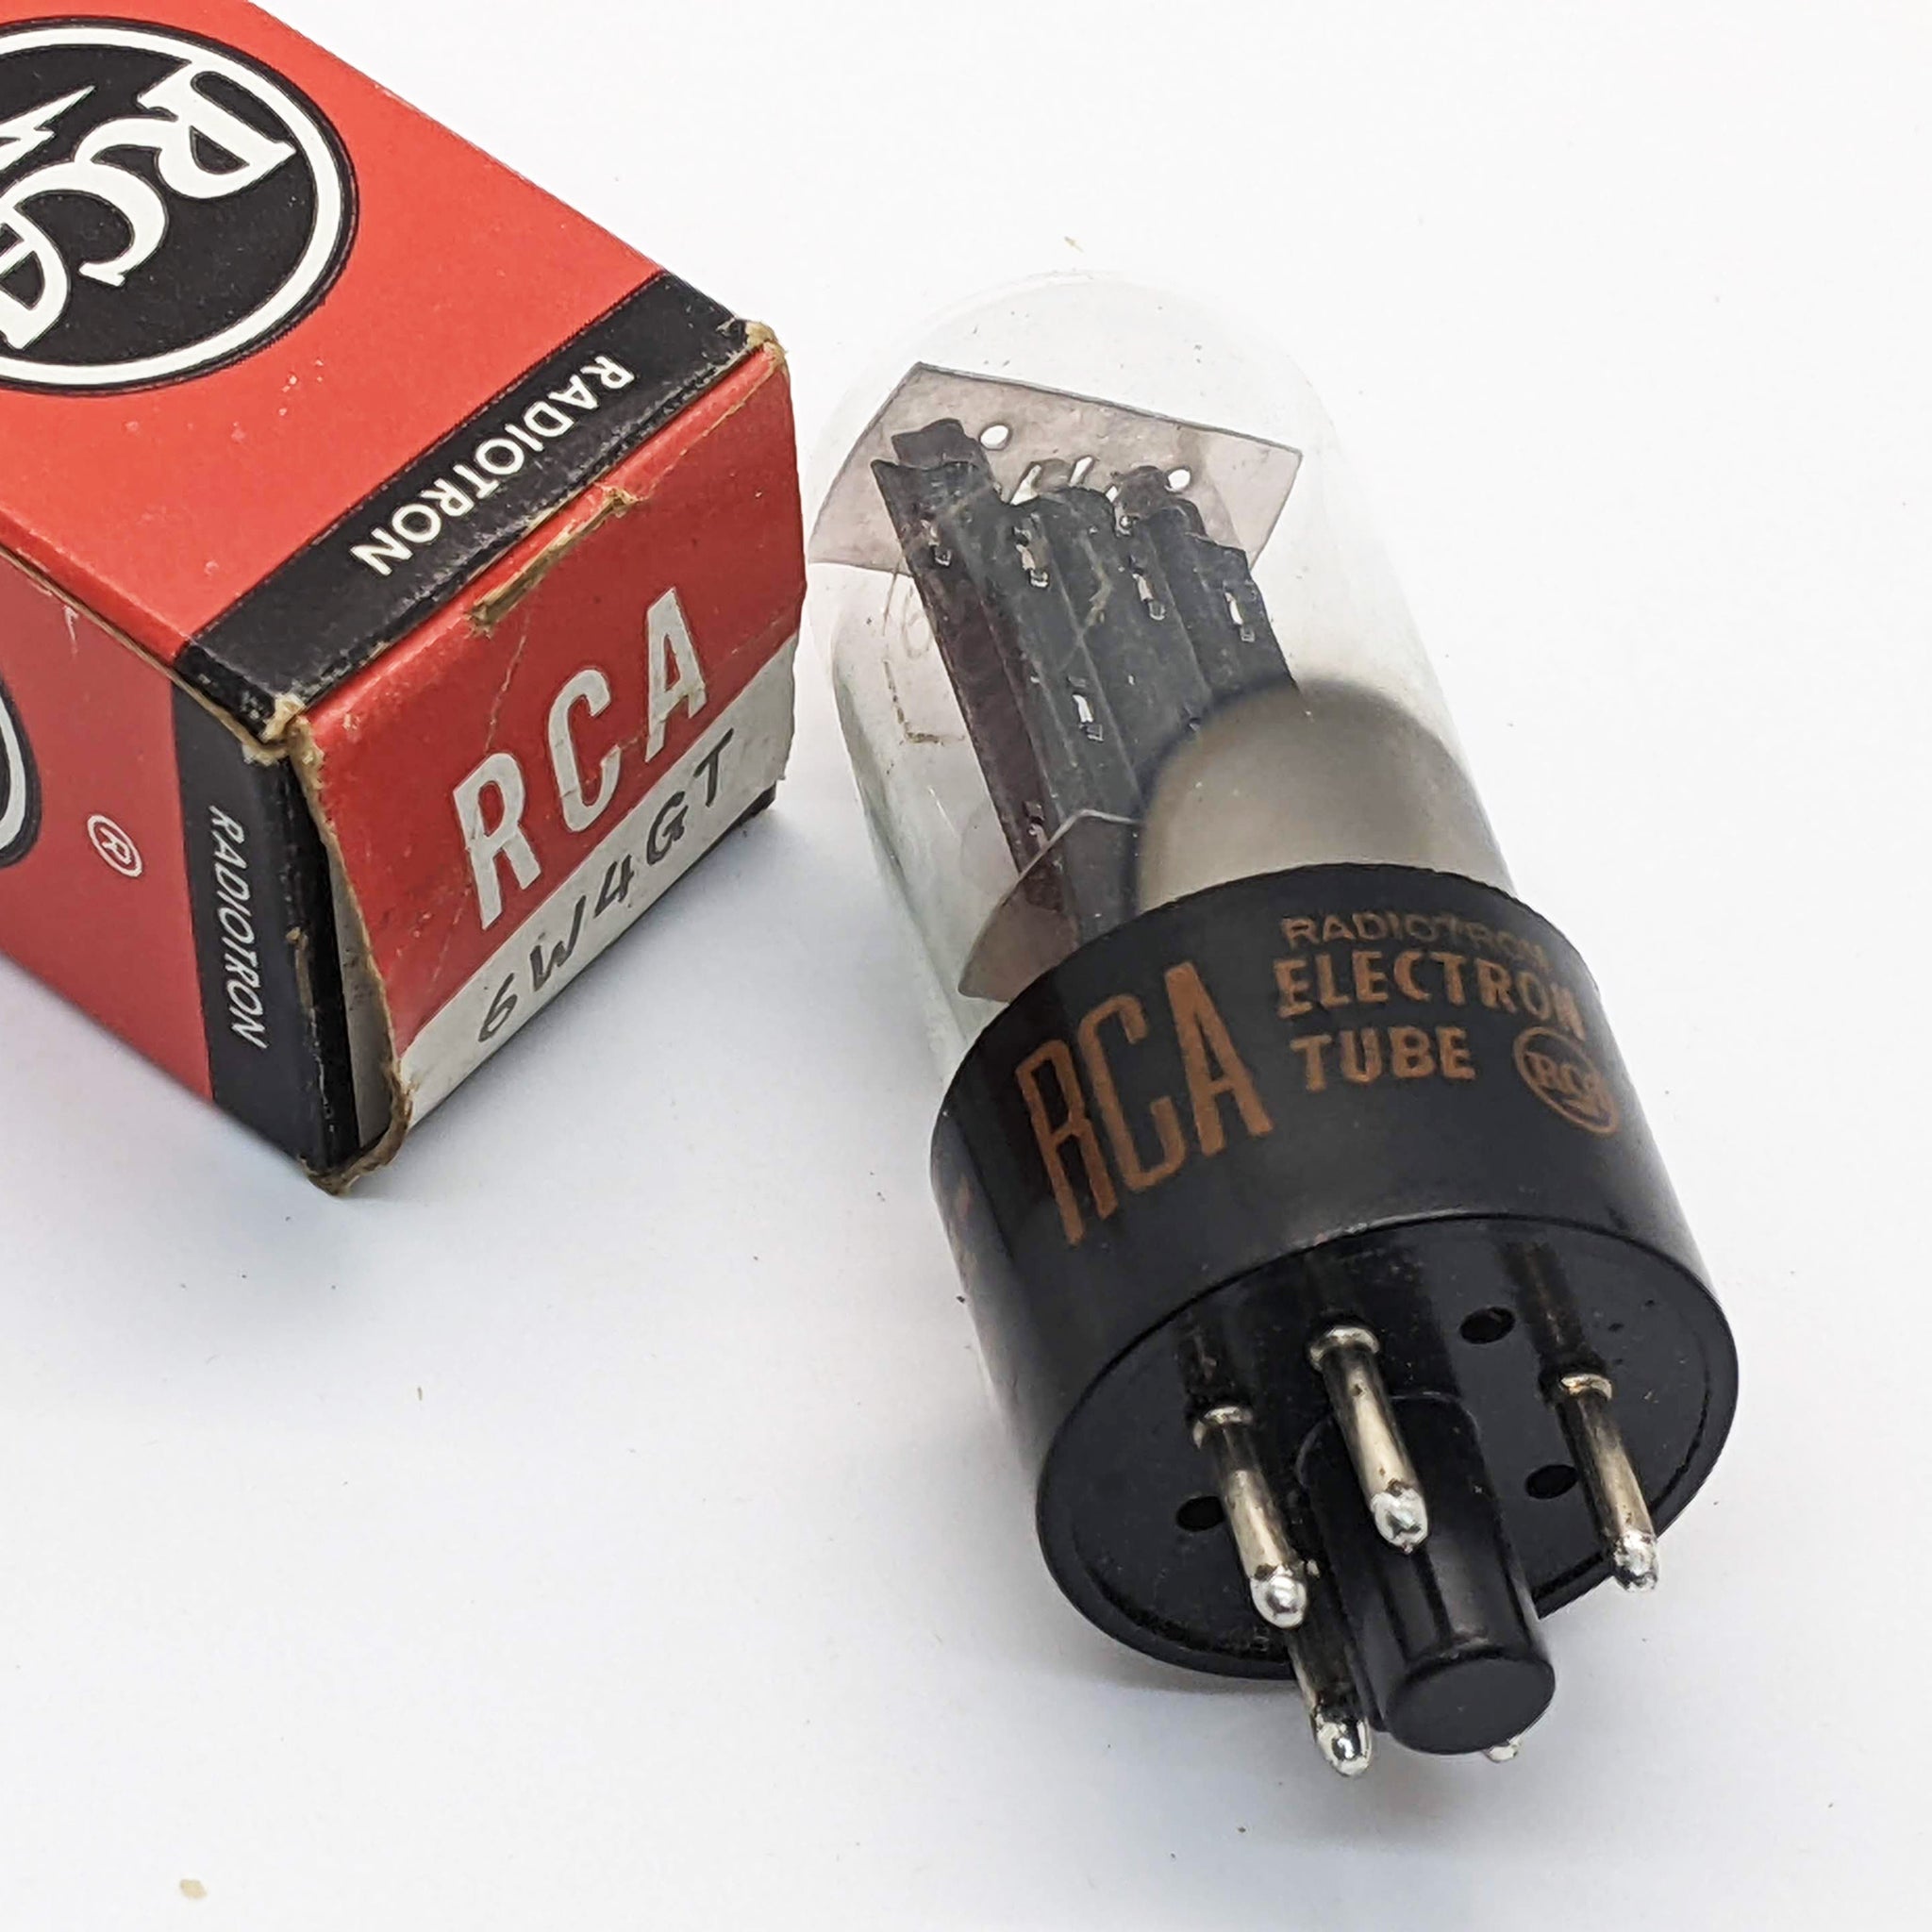 RCA 6W4GT New Tube, 1967, Hickok Tested Good